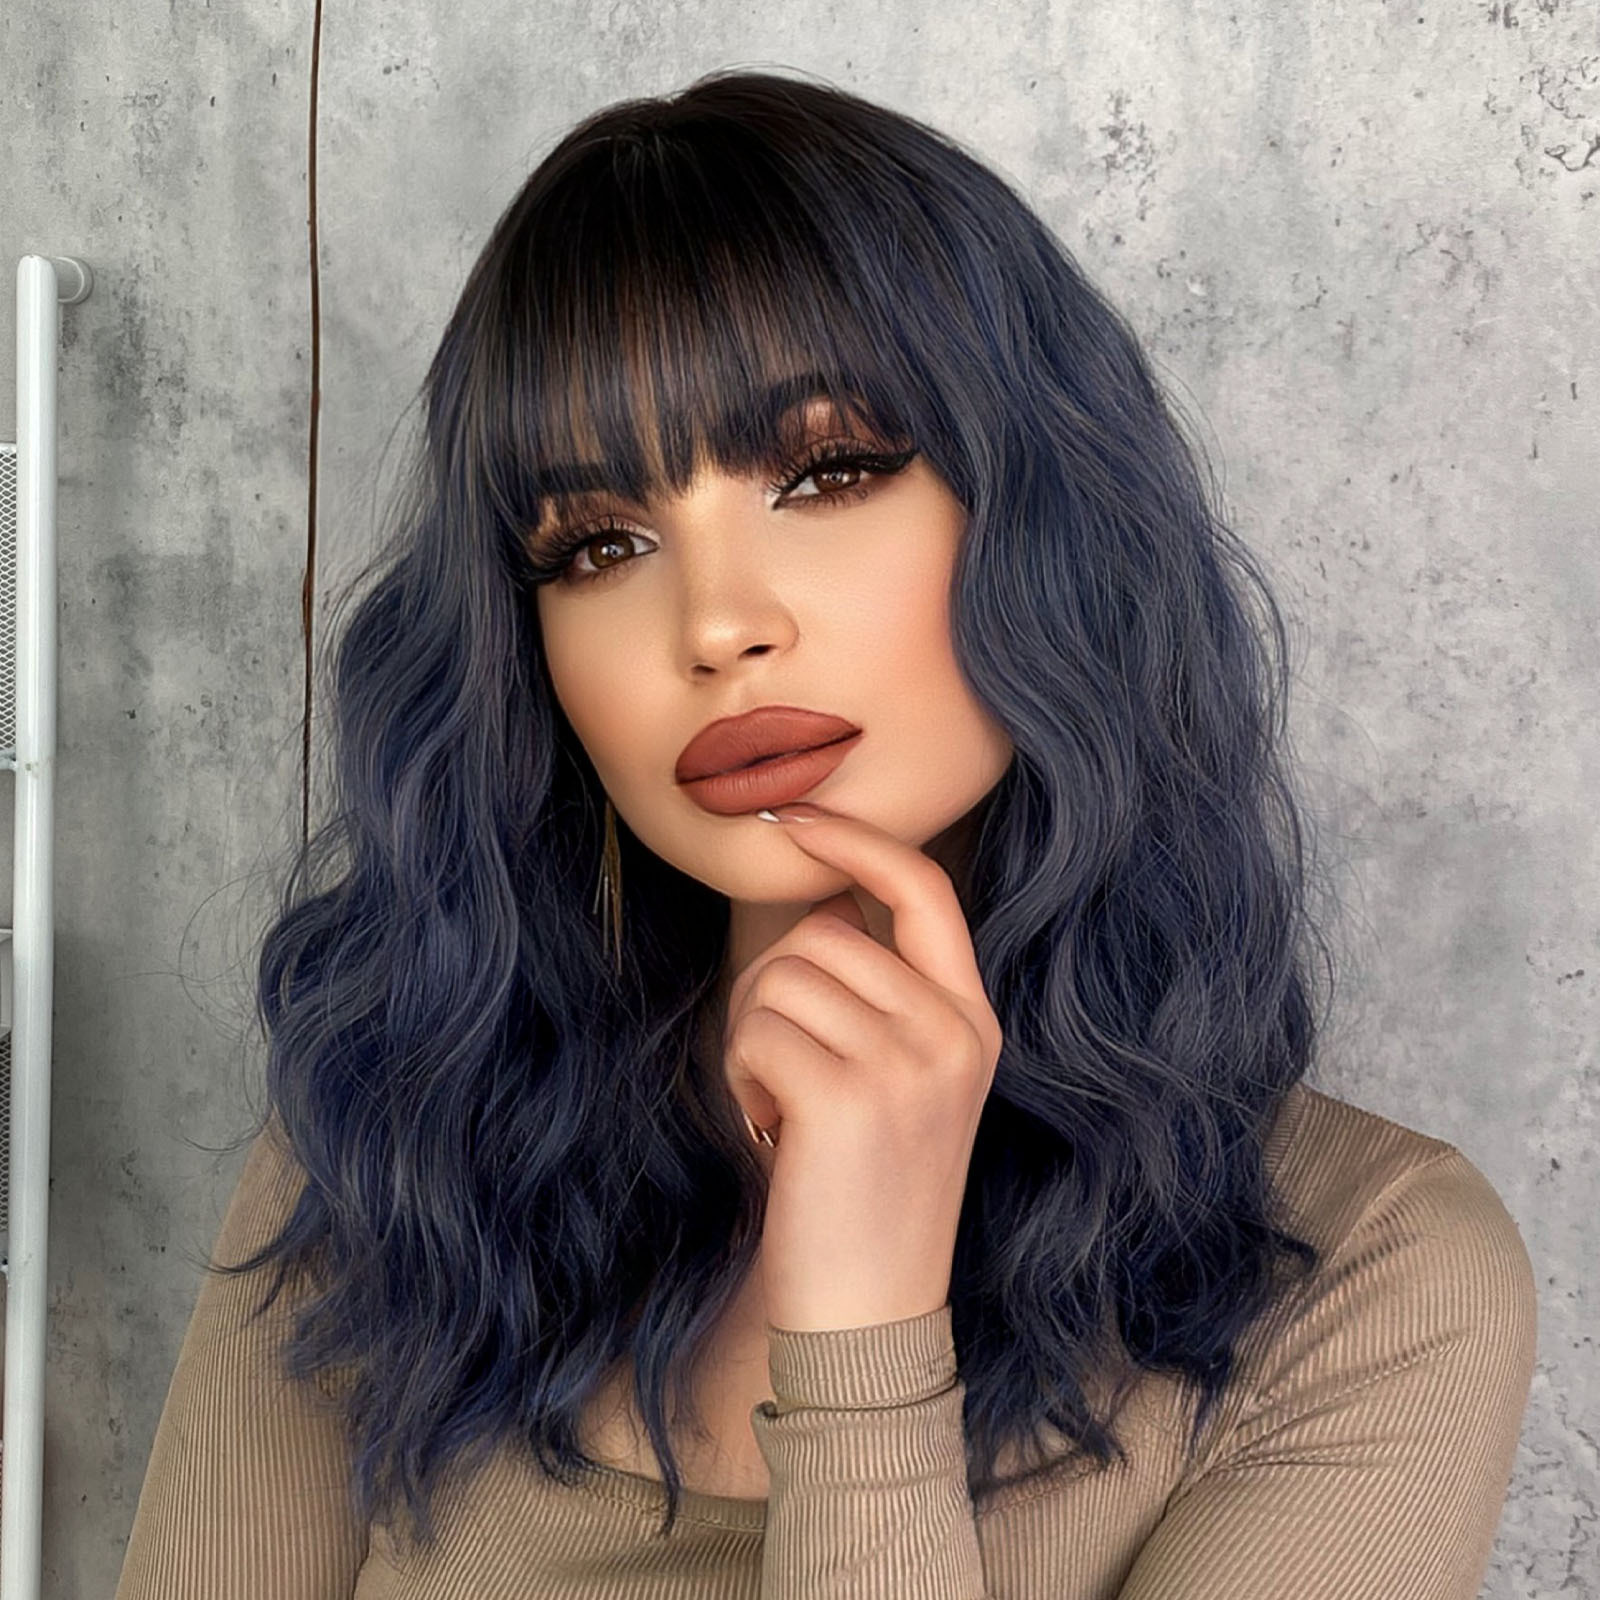 A trendy female haze blue wig with wavy medium-length curly hair, made from synthetic material for an effortless and stylish appearance